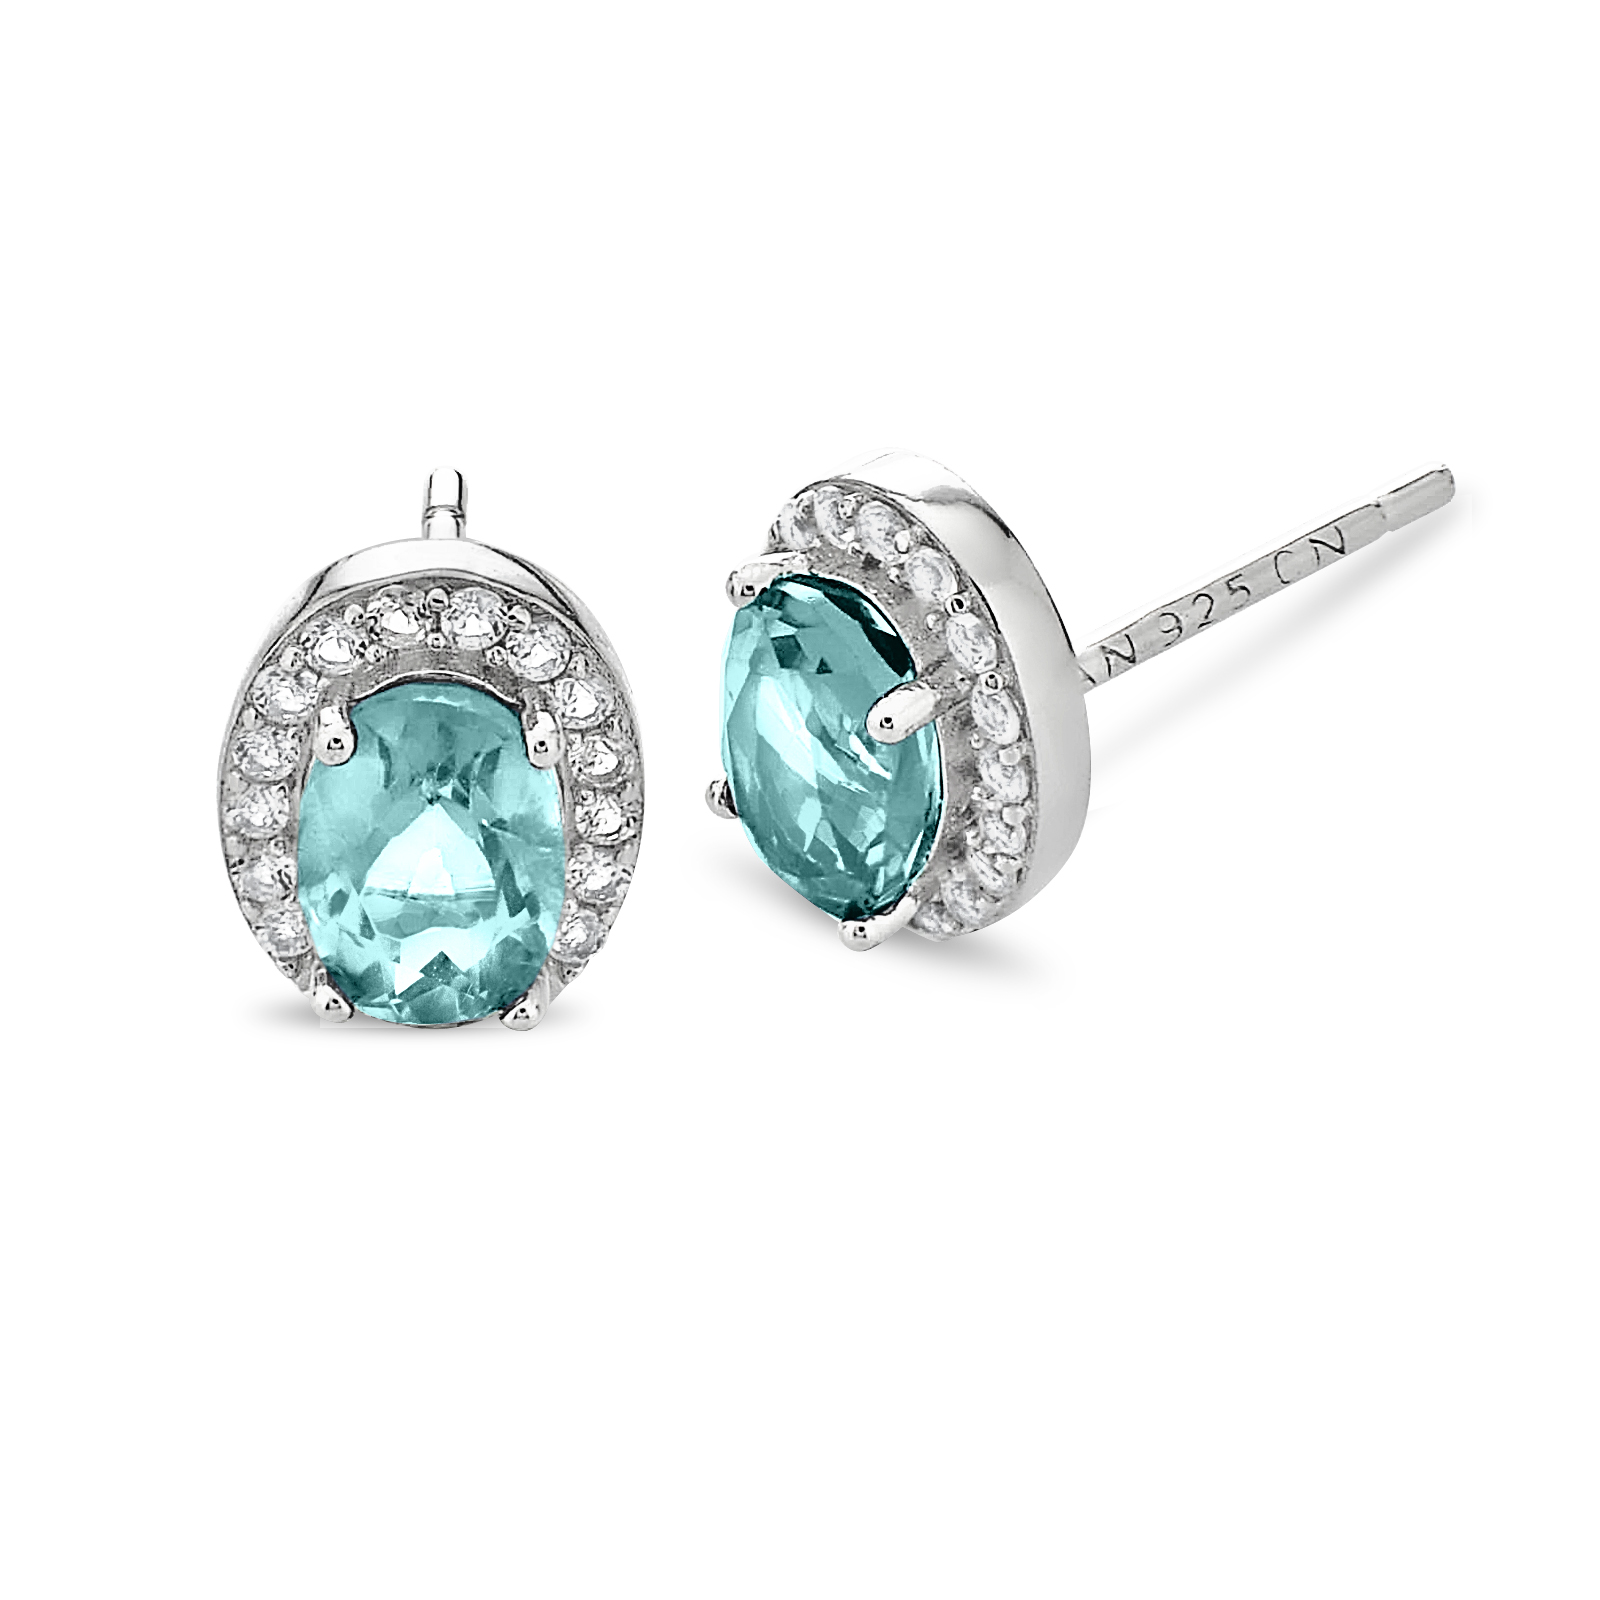 Sterling Silver Aquamarine and White Topaz Stud Earrings